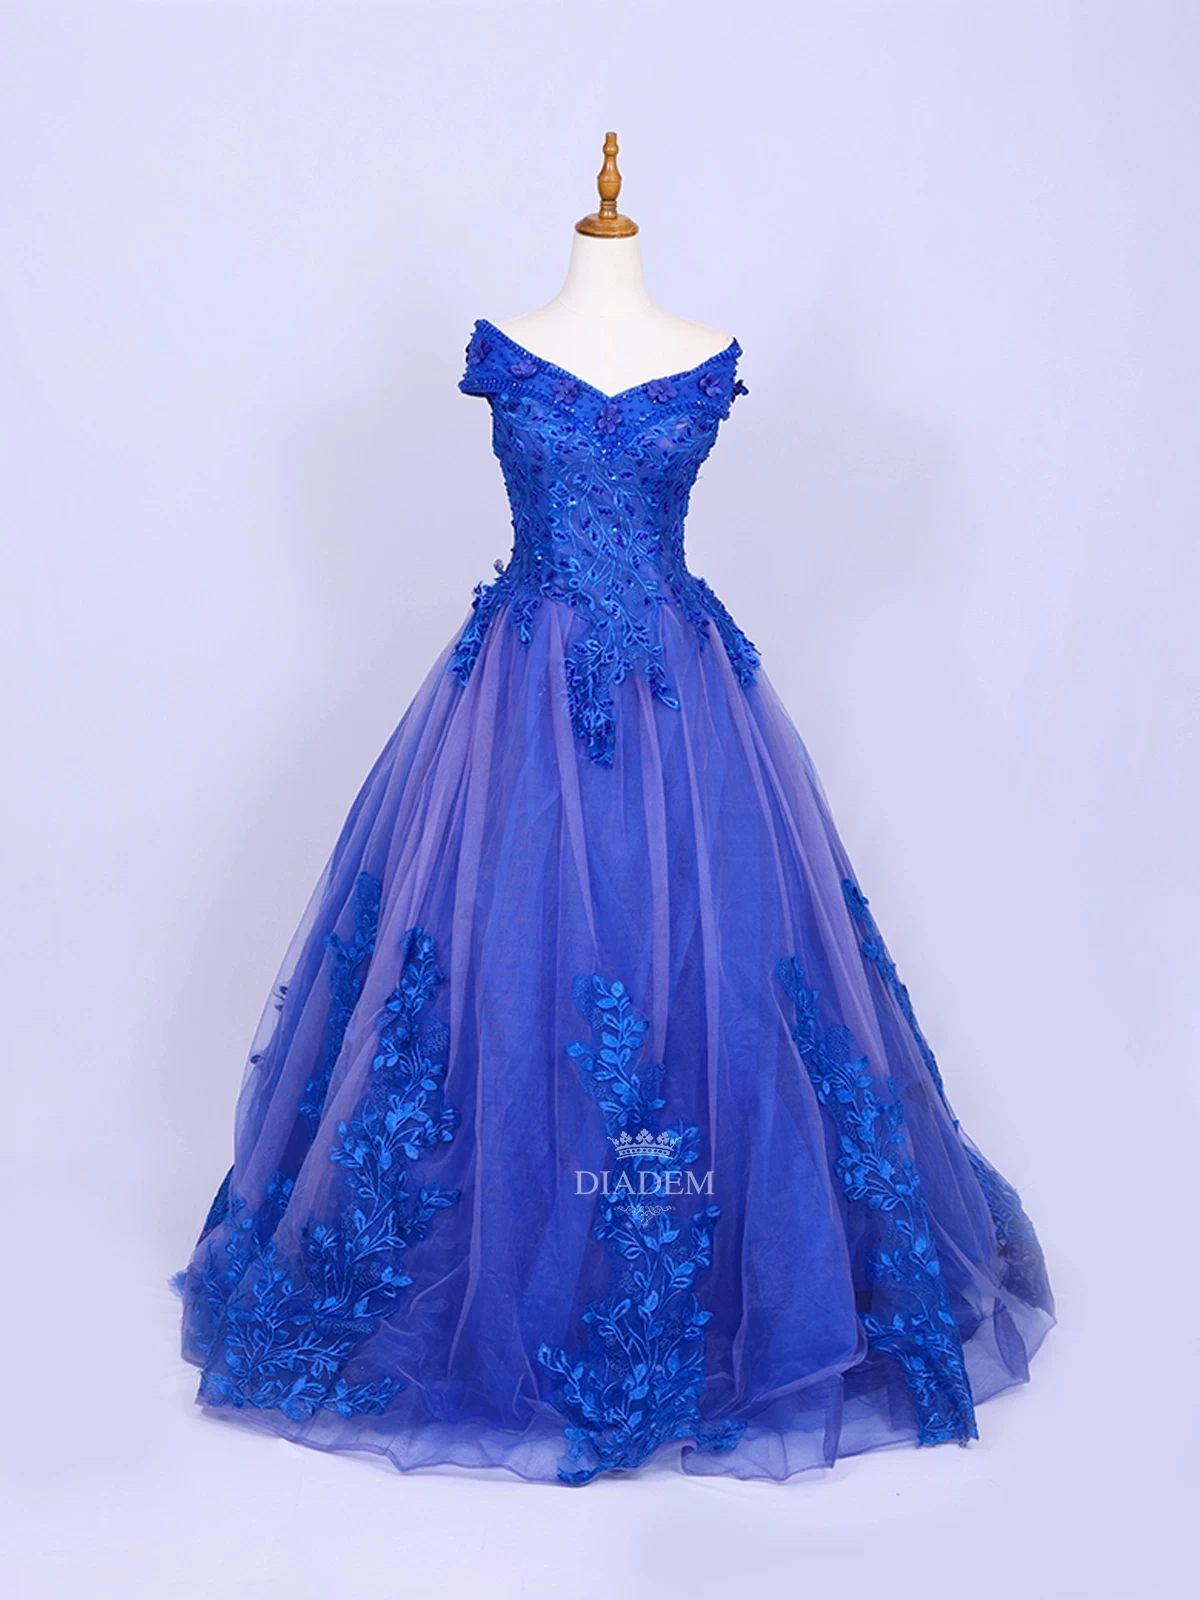 Royal Blue Net Off-Shoulder Gown Adorned with Floral Laces and Sequins